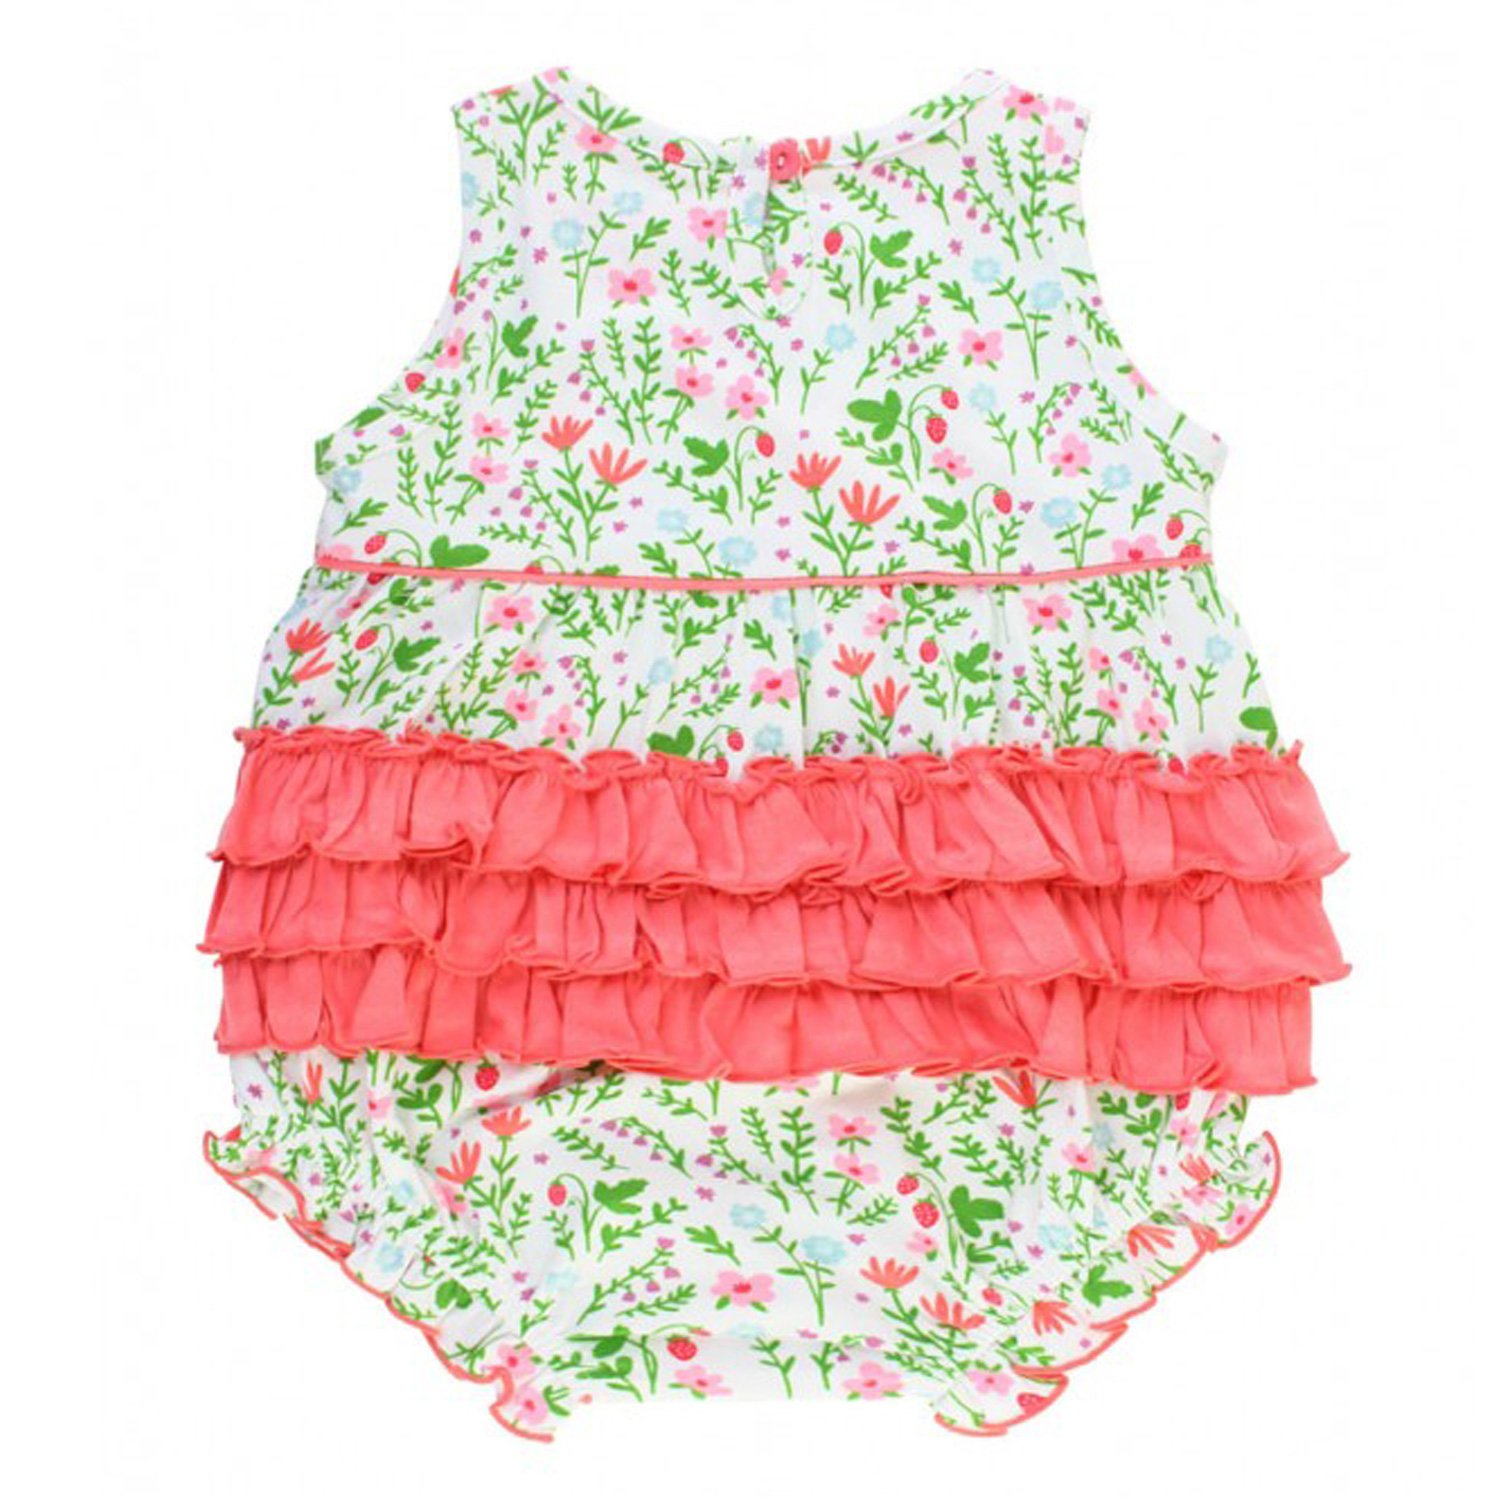 Ruffle Butts Strawberry Fields Ruffle Romper for Baby and Toddler Girls